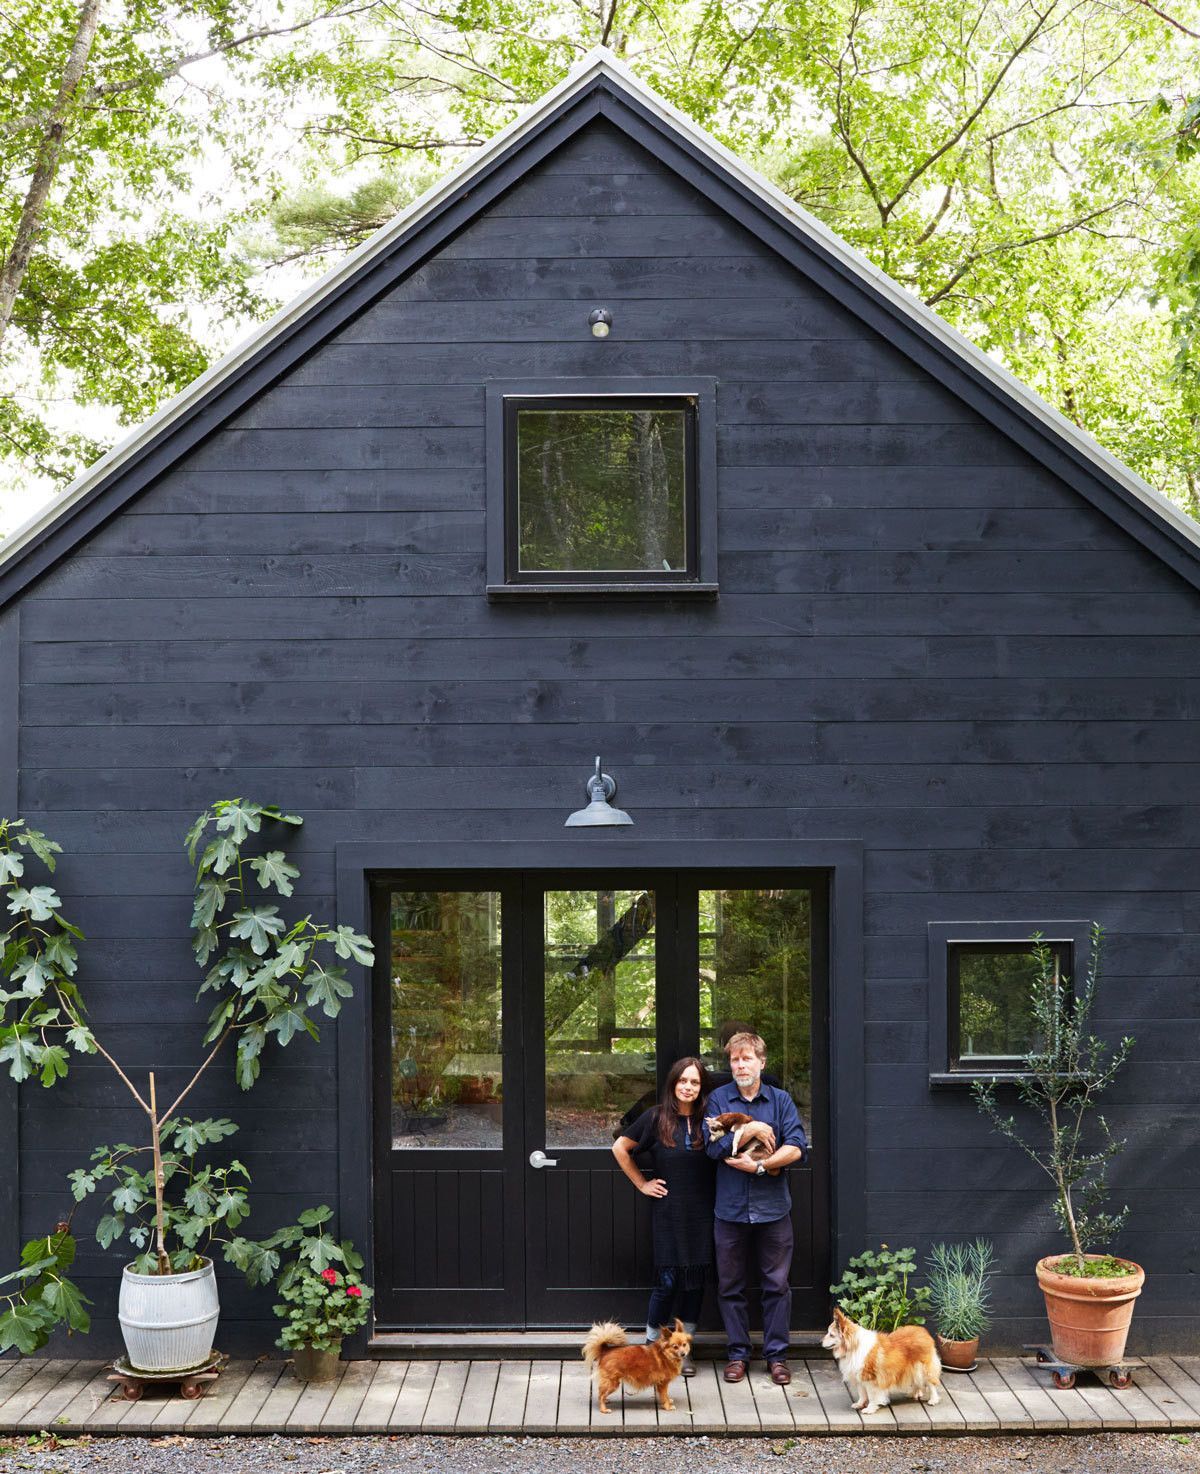 Michele Michael and Patrick Moore in front of the barn they built at their home in Dresden, Maine.